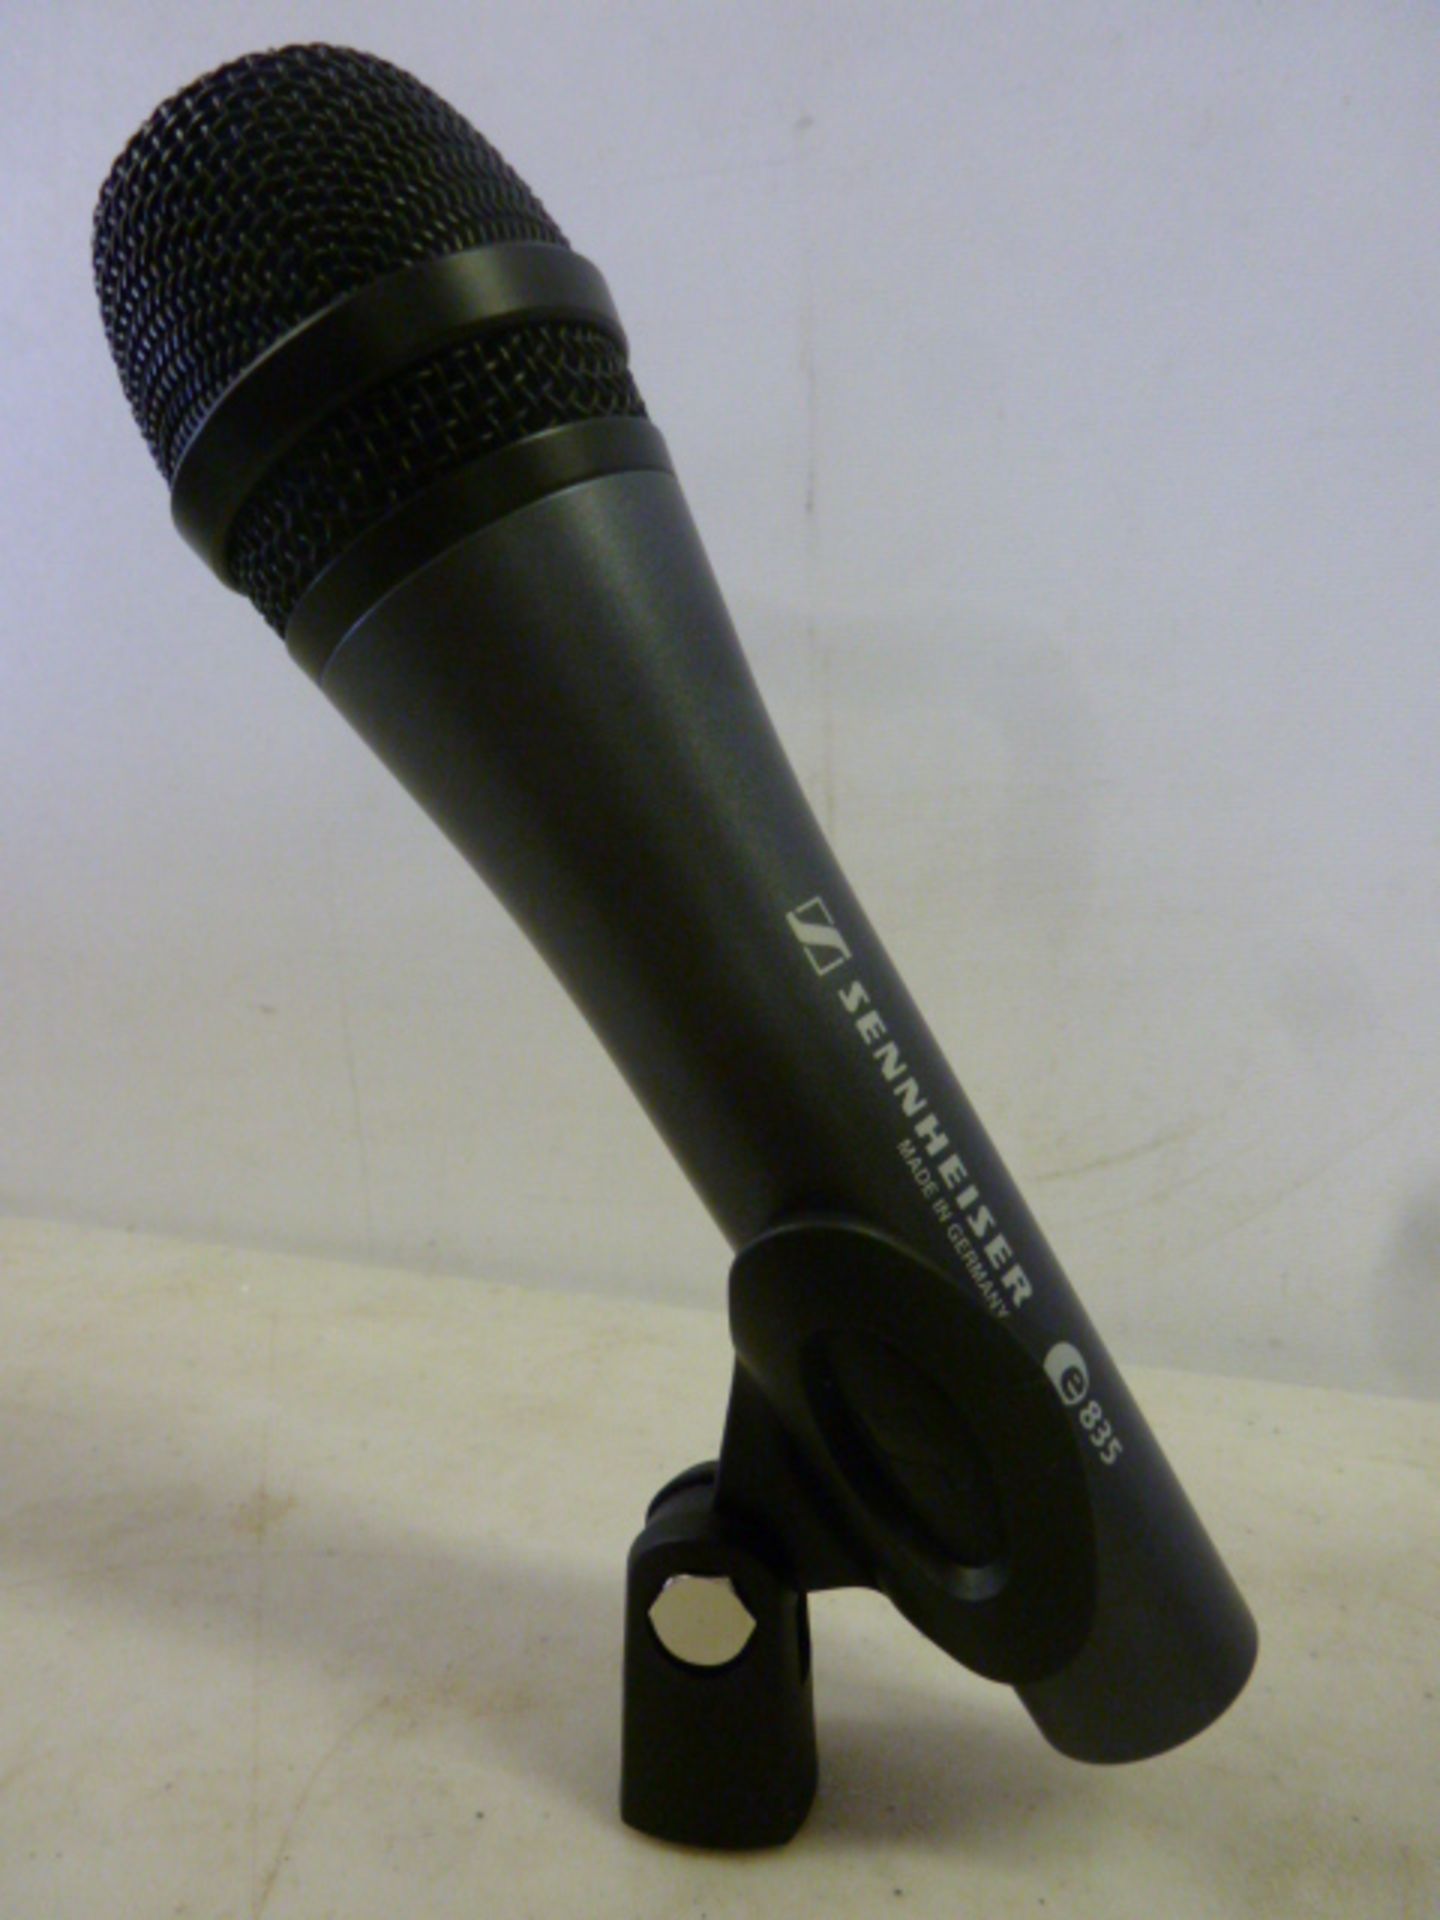 Sennheiser Evolution E 835 Microphone - Metallic Grey with Pouch & Microphone Stand Attachment. - Image 2 of 2